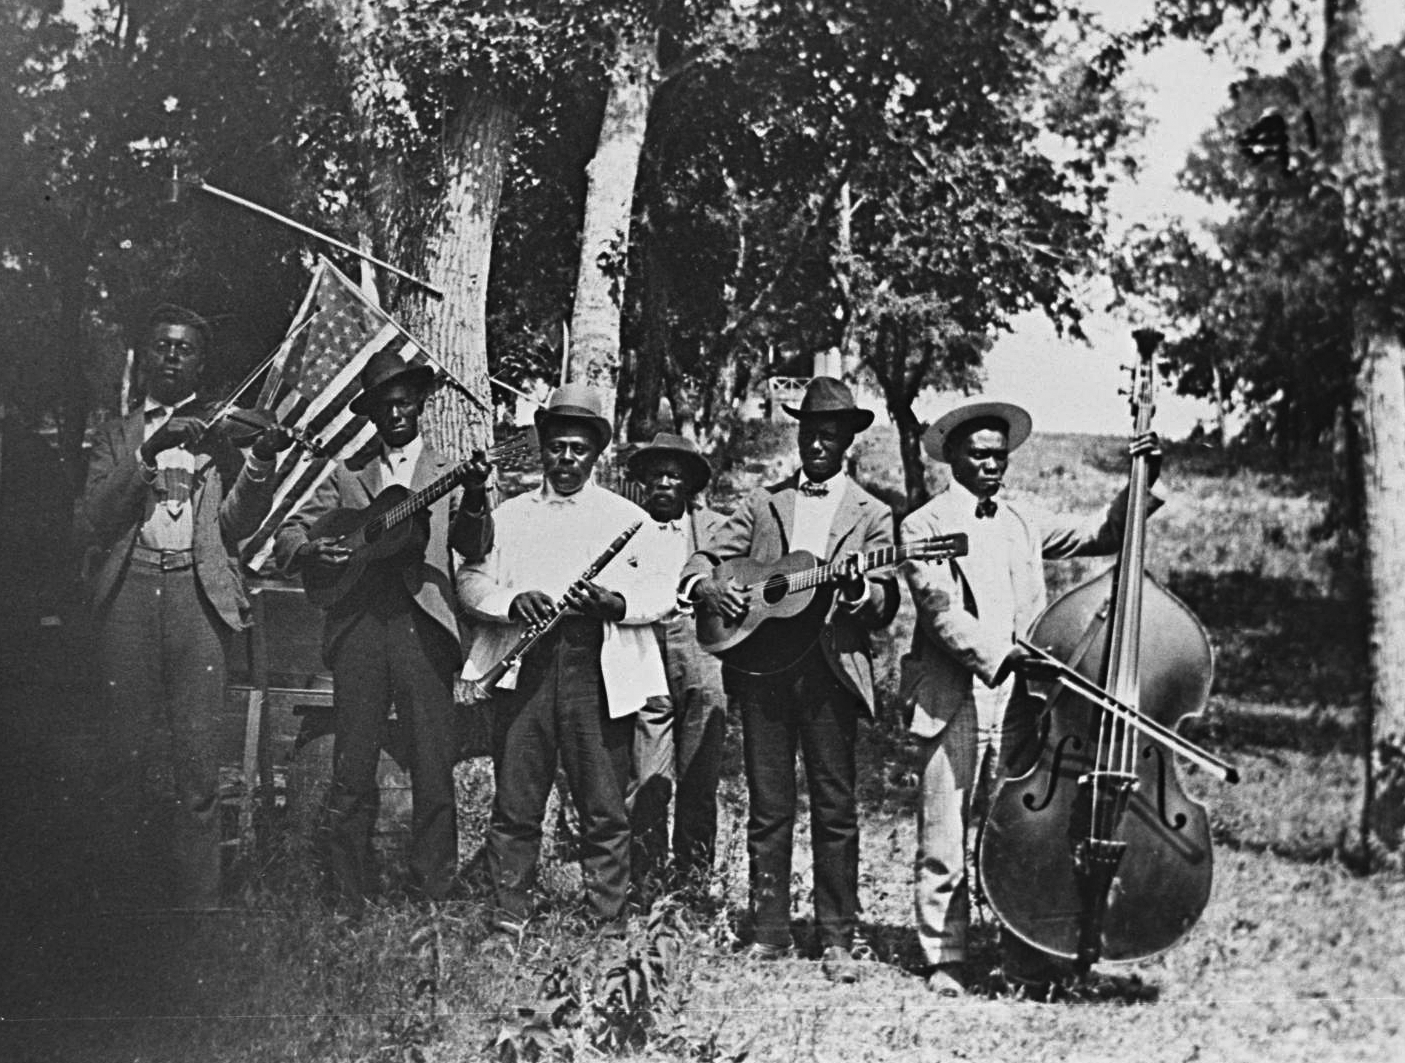 An African-American band plays at Juneteenth Day celebration in Austin, Texas, 1900. (University of North Texas Libraries)